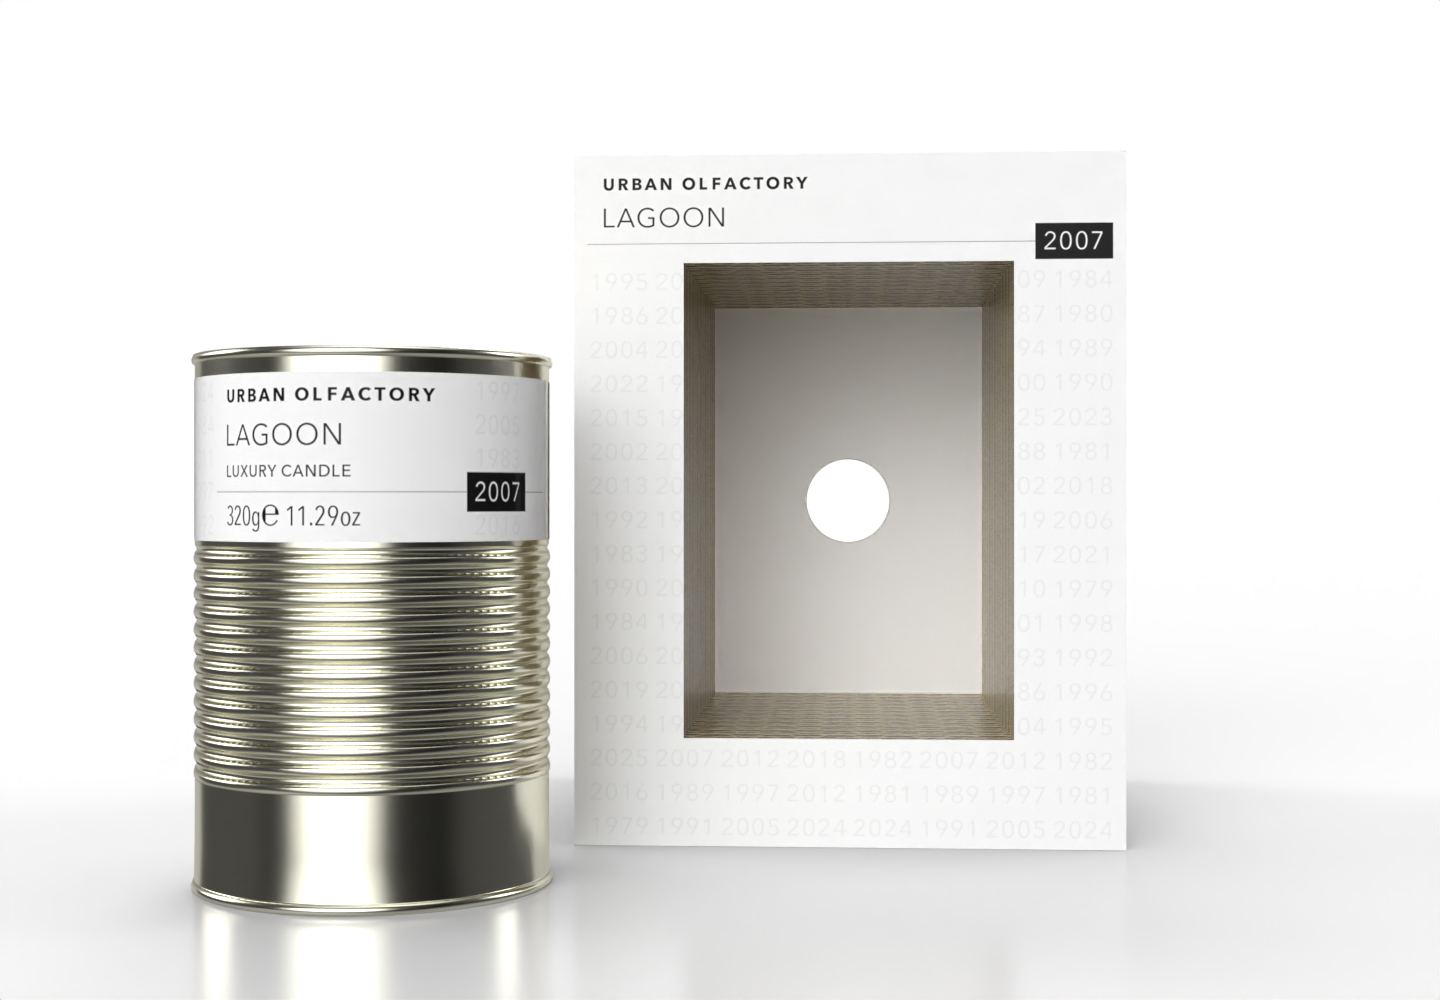 Urban Olfactory premium fragranced candle packaging graphics identity design by Paul Cartwright Branding.